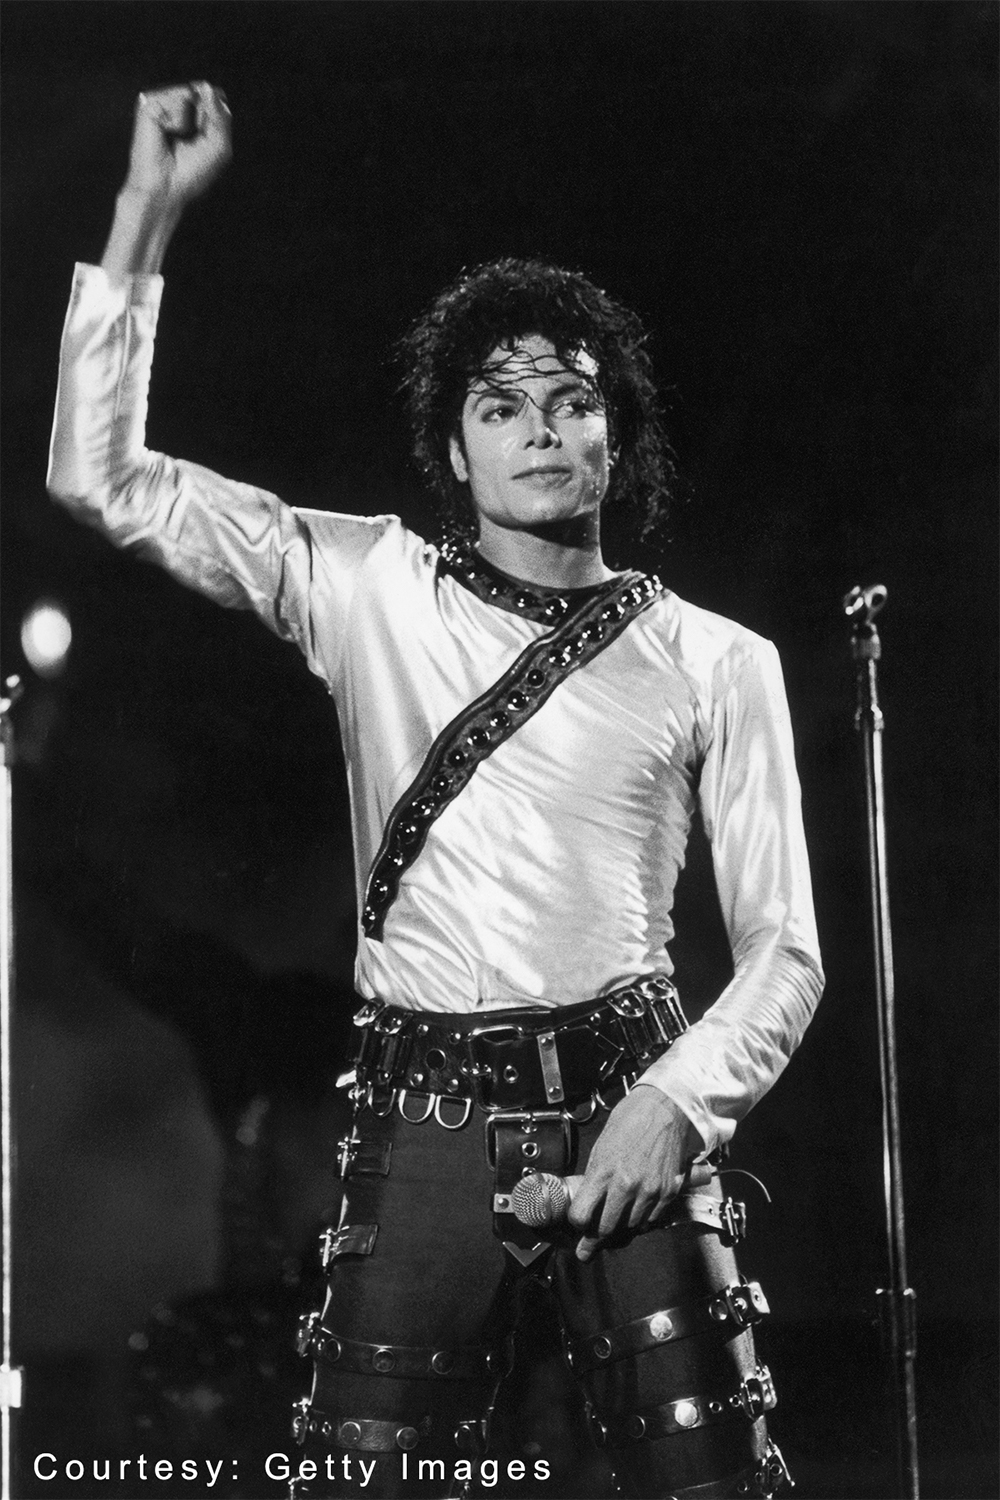 Michael Jackson performs on stage in the 1980s.